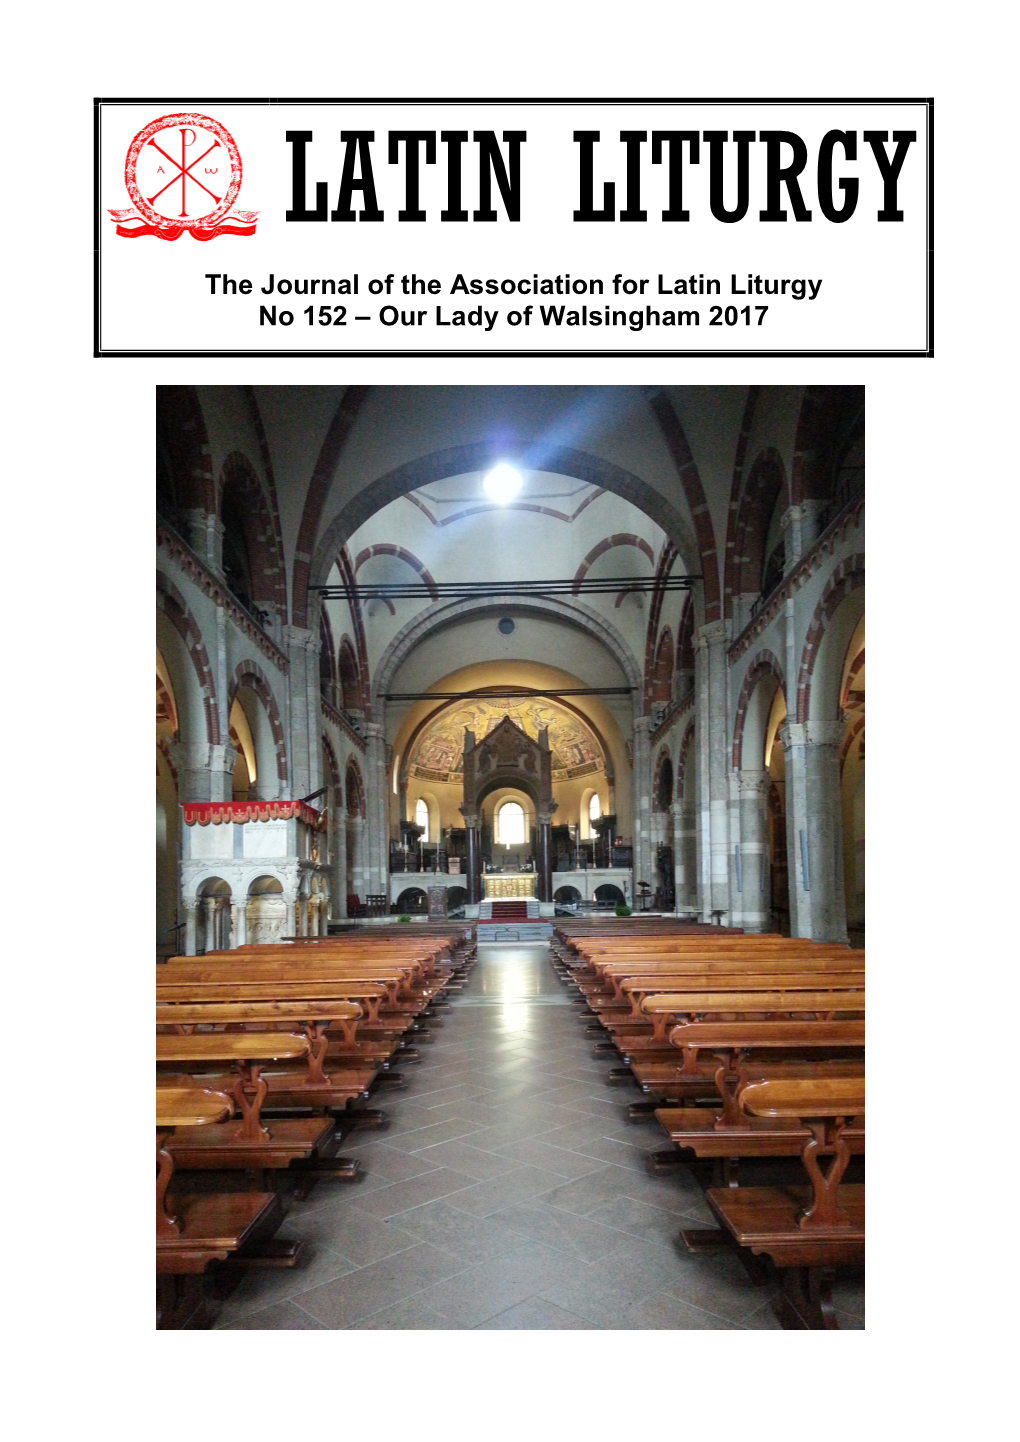 The Journal of the Association for Latin Liturgy No 152 – Our Lady of Walsingham 2017